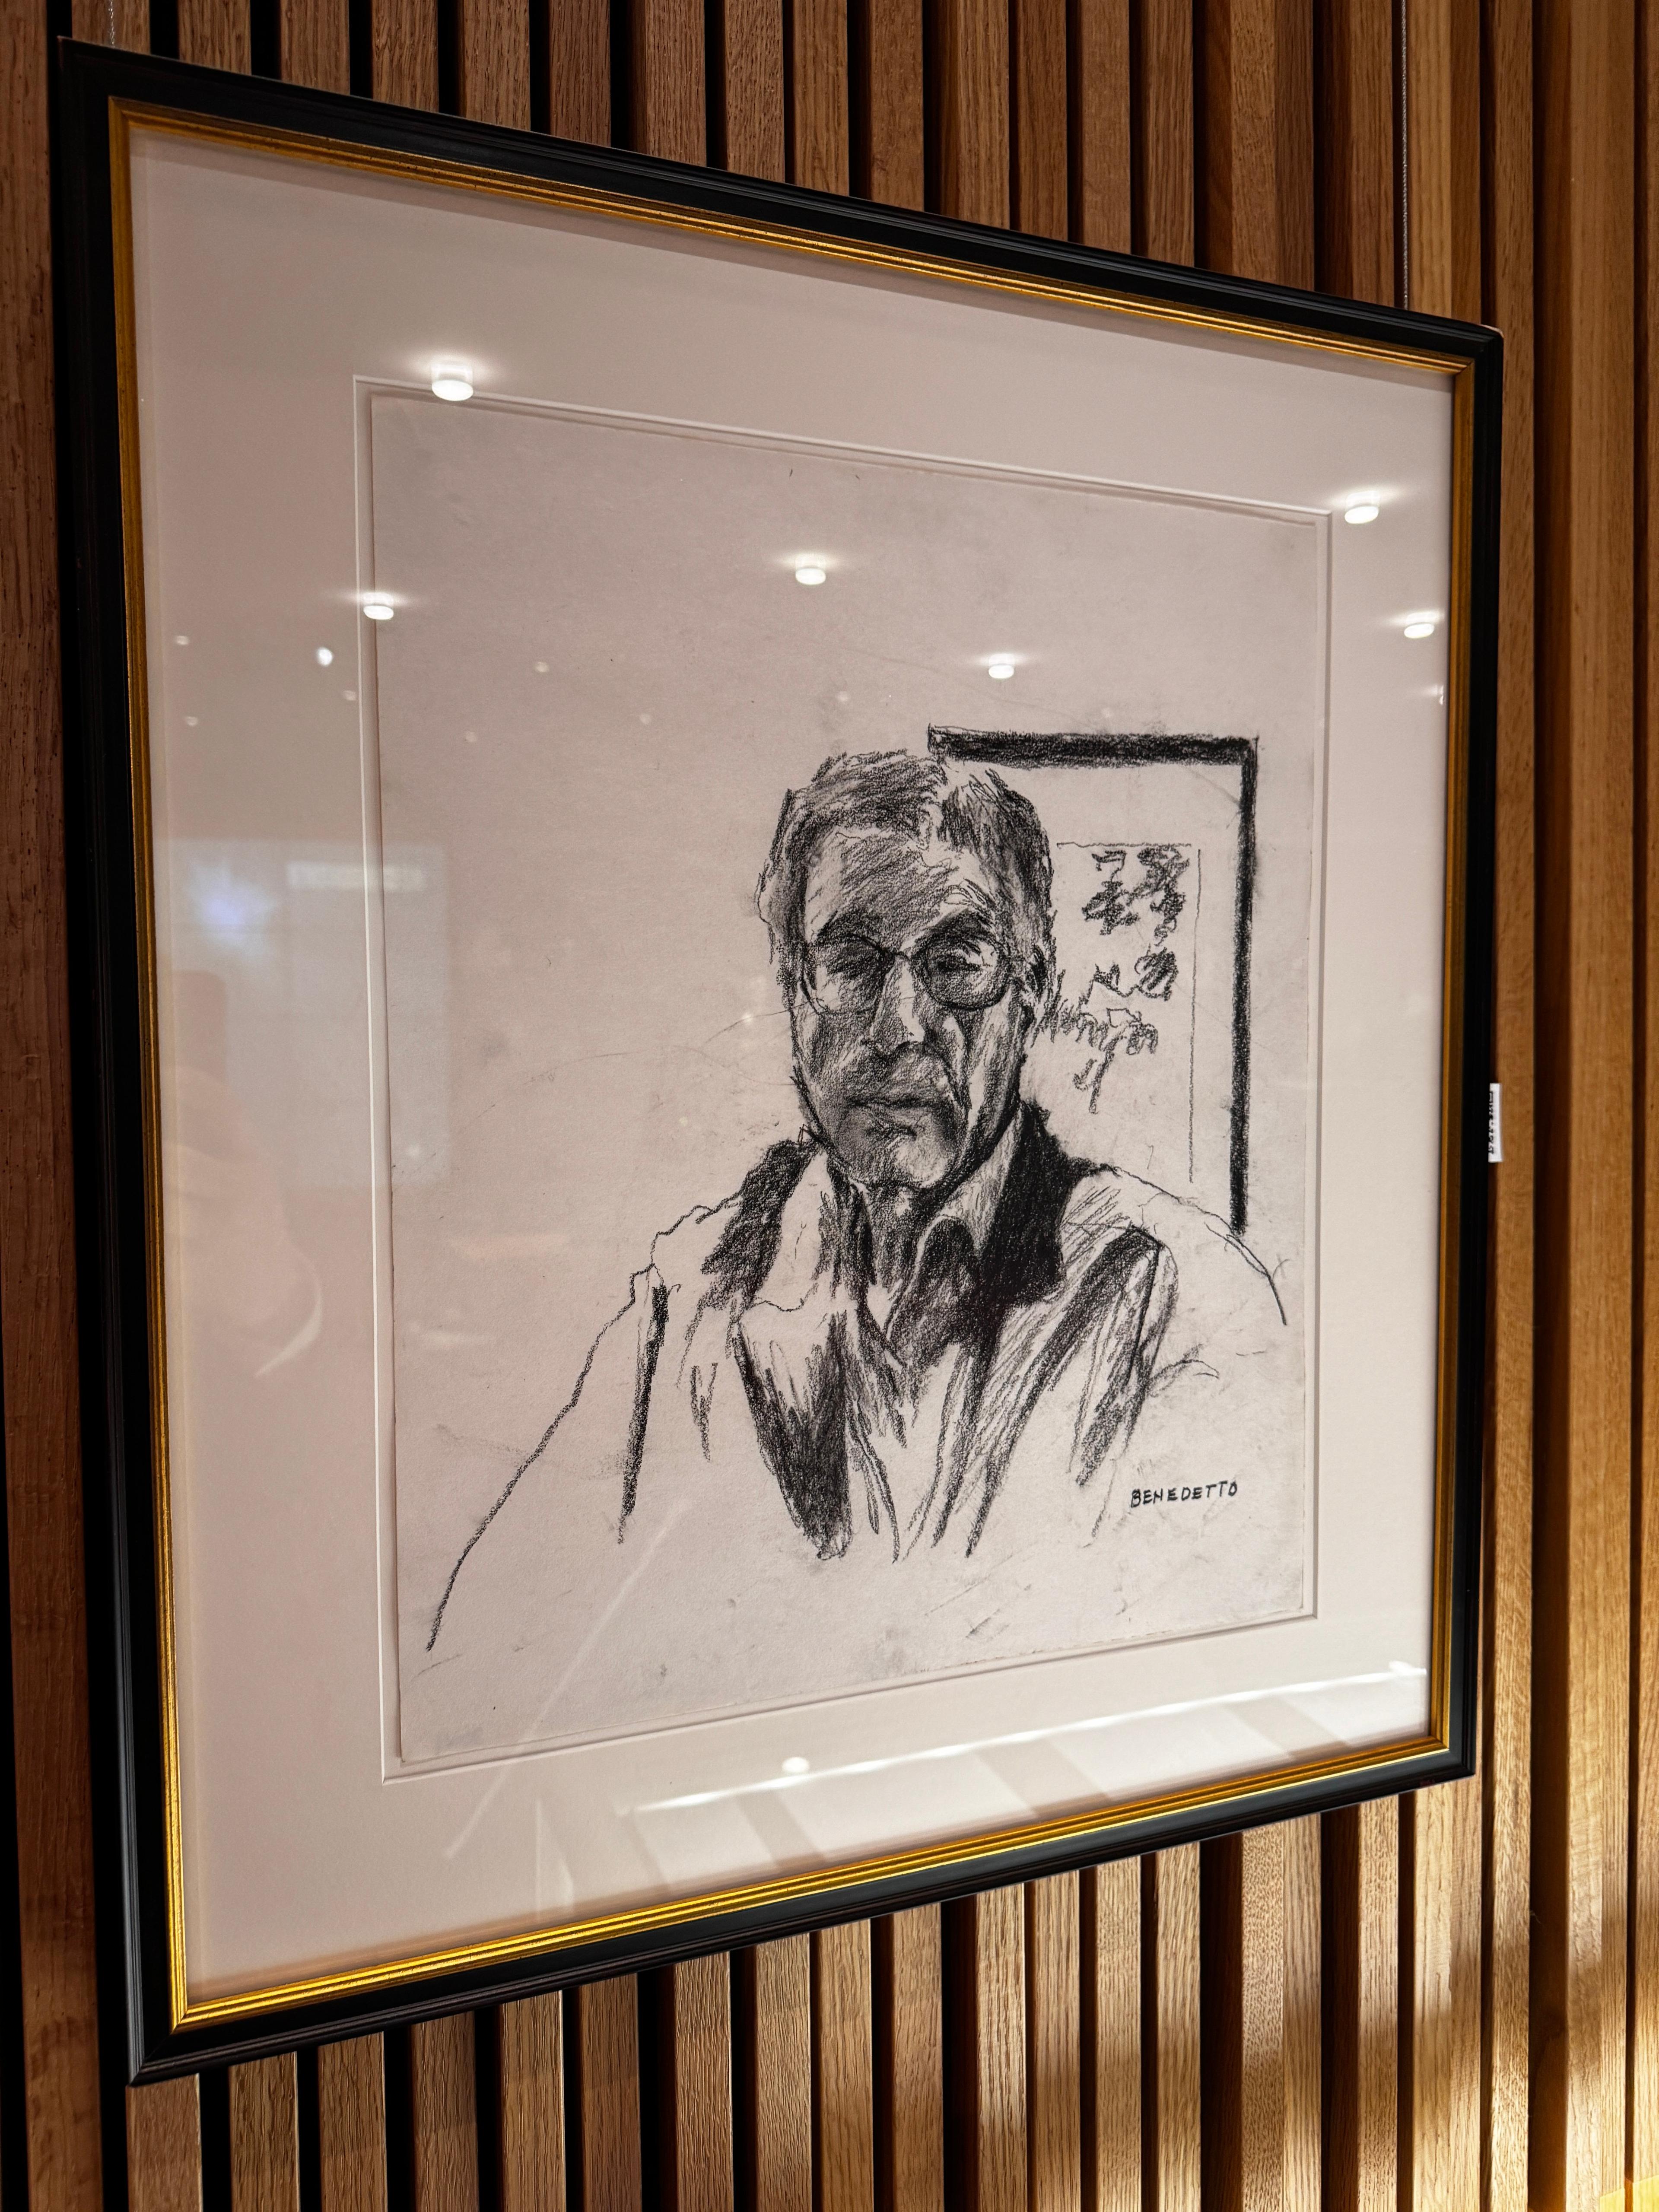 A framed black and white drawing